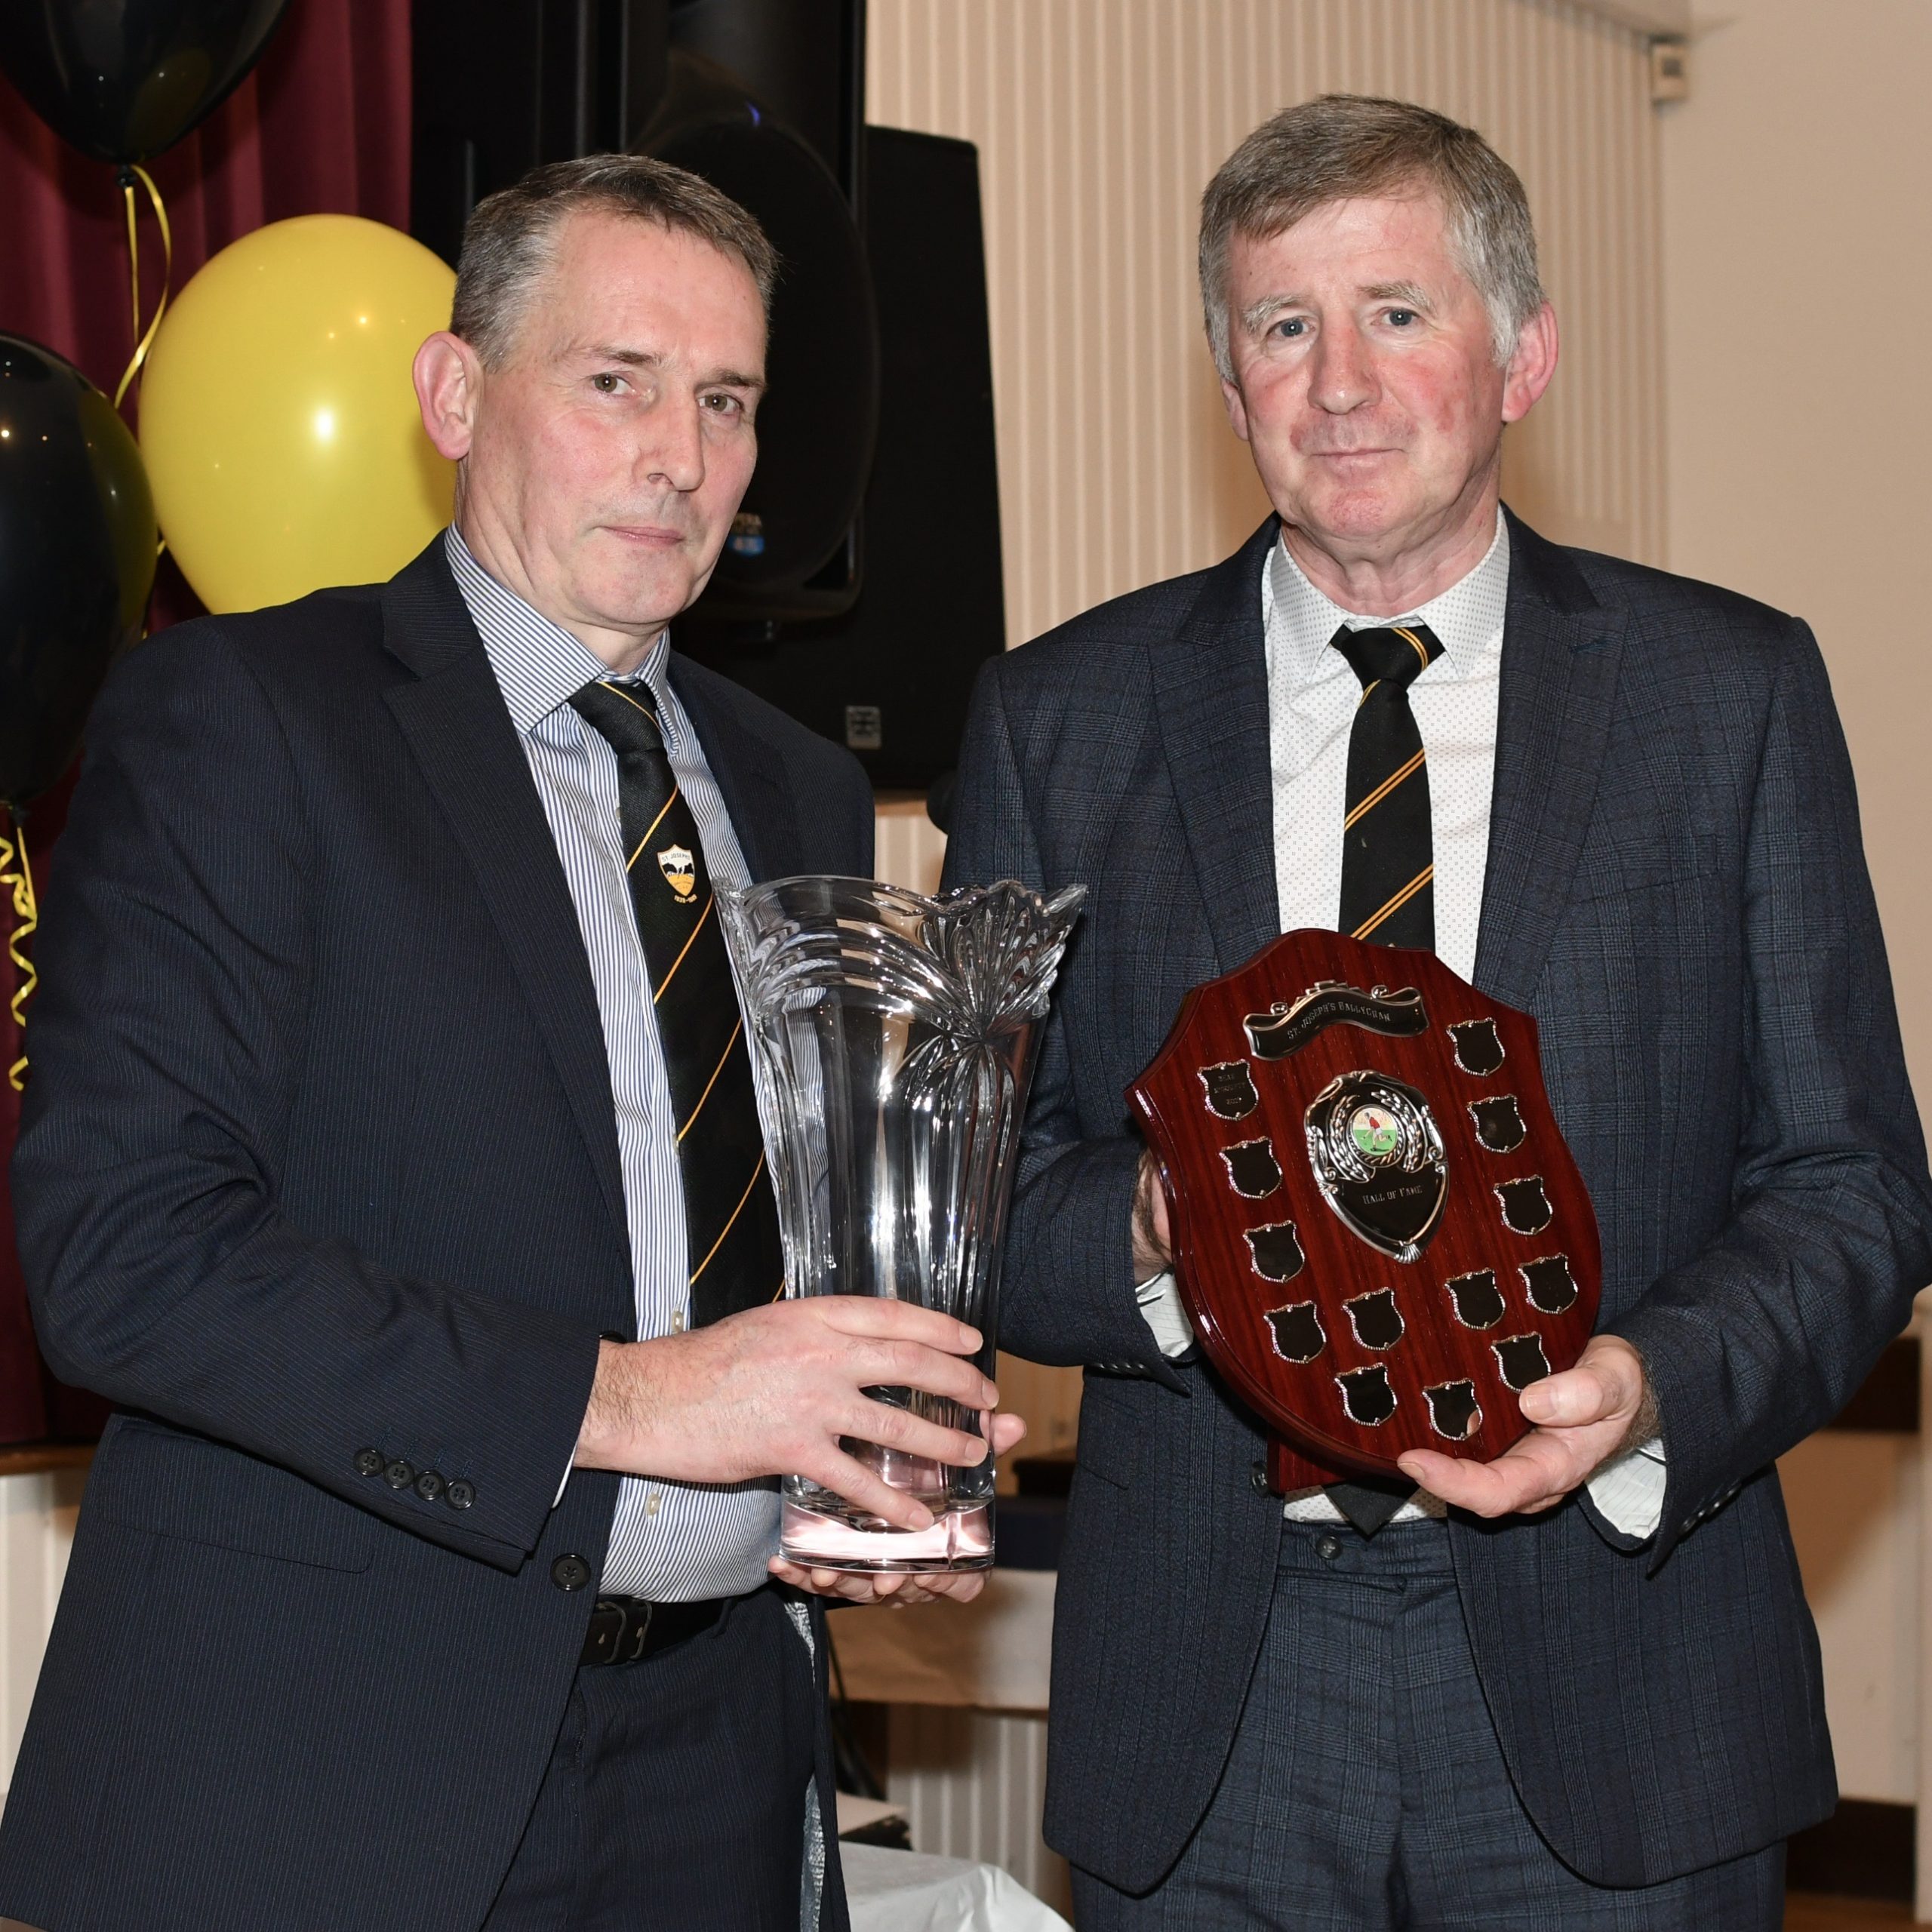 Sean McGourty becomes Ballycran’s latest Inductee into the Hall of Fame